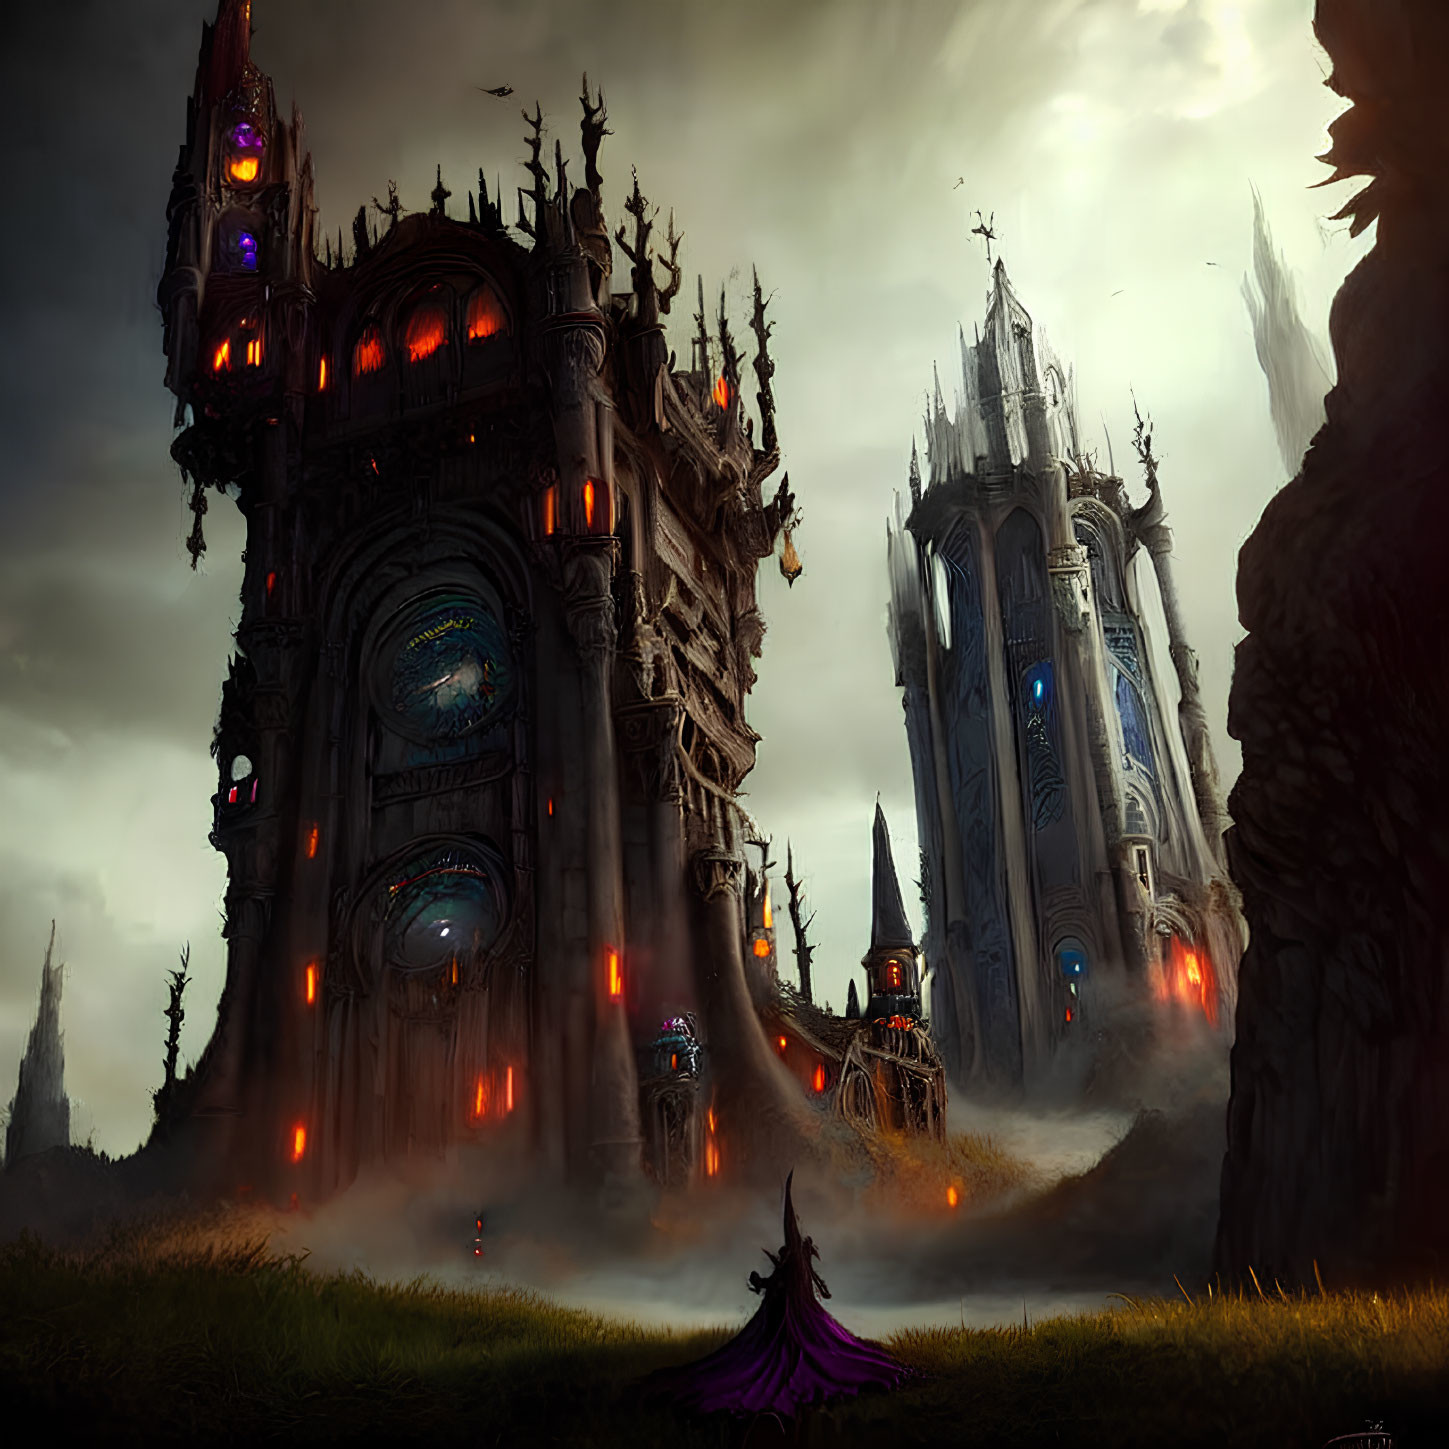 Gothic castle with purple lighting, towering spires, cloaked figure, red windows